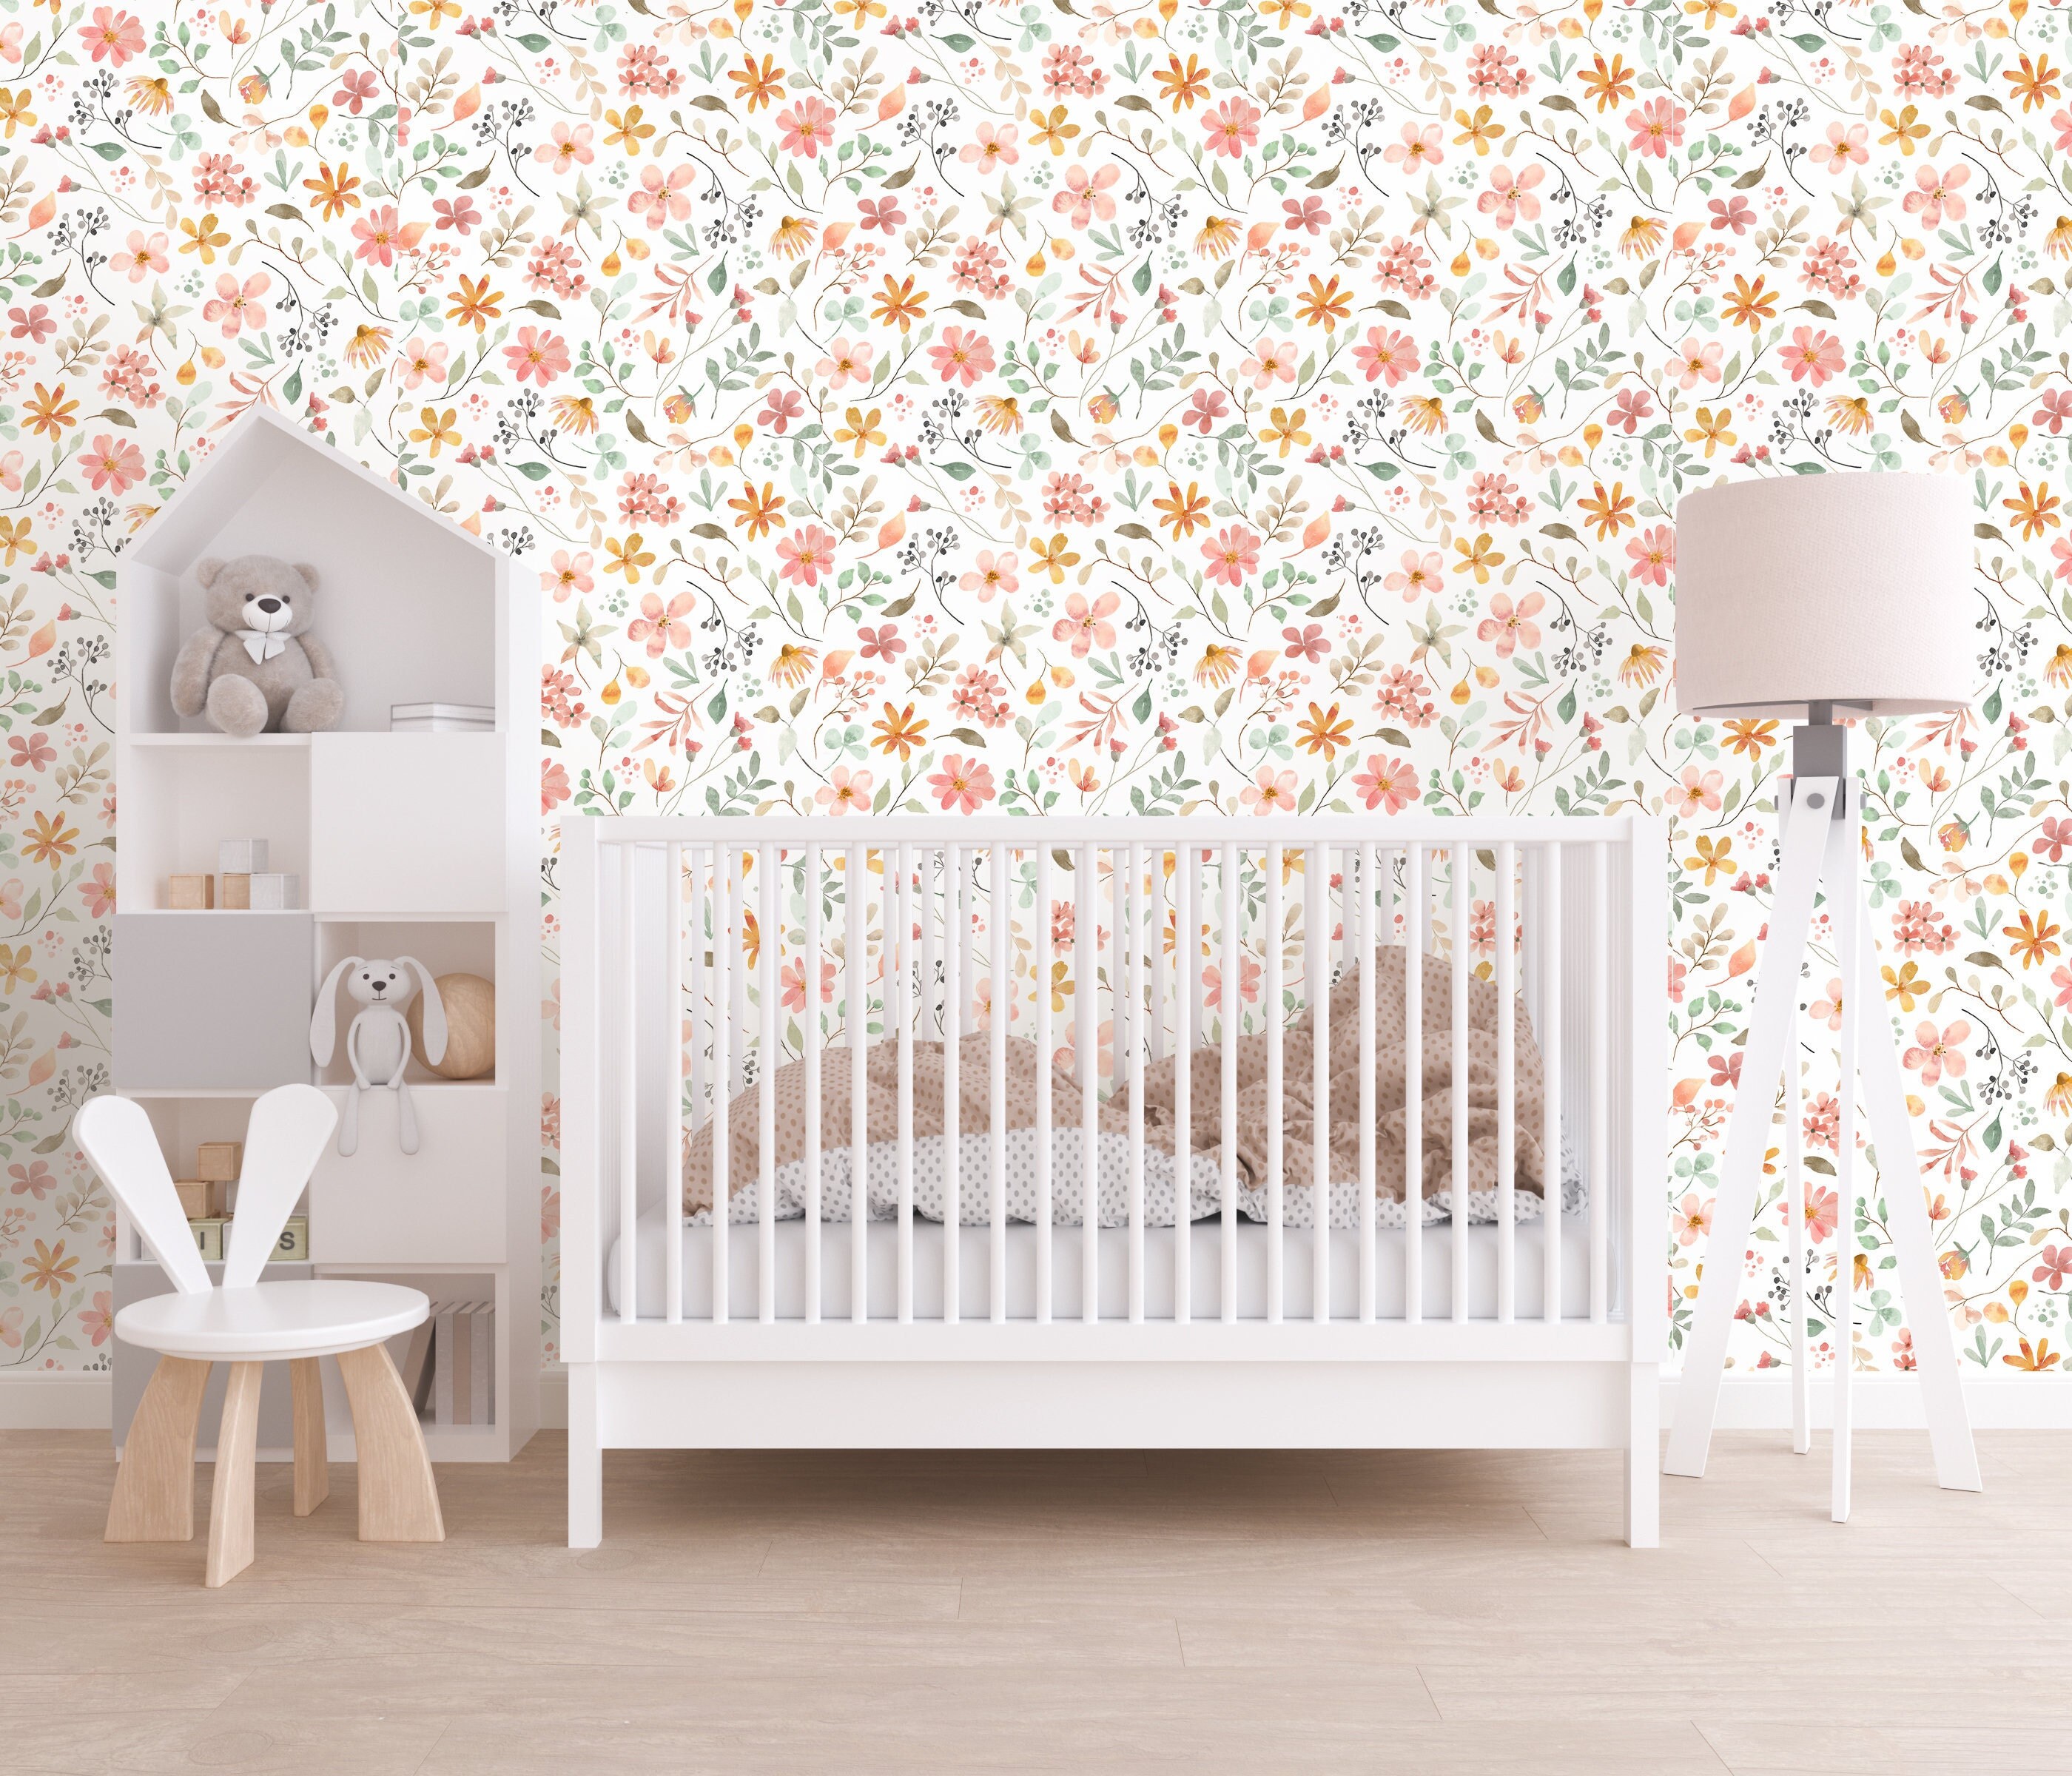 Peel and Stick Removable Wallpaper  Home Decor  EazzyWalls